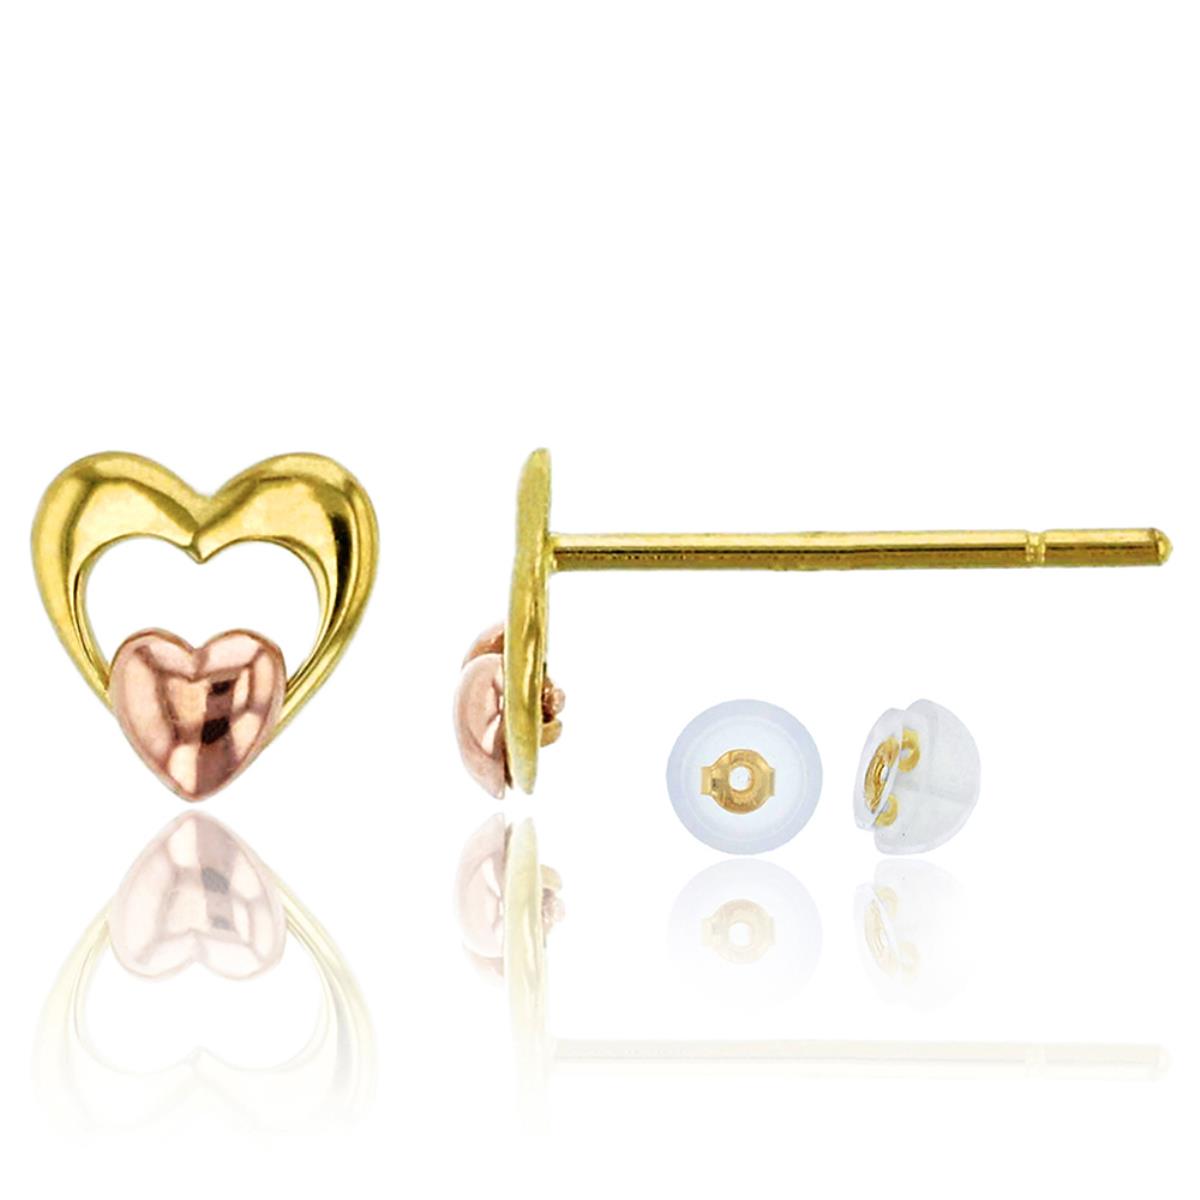 10K Yellow & Rose Gold Polished Double Heart Stud Earring with Bubble Silicone Back